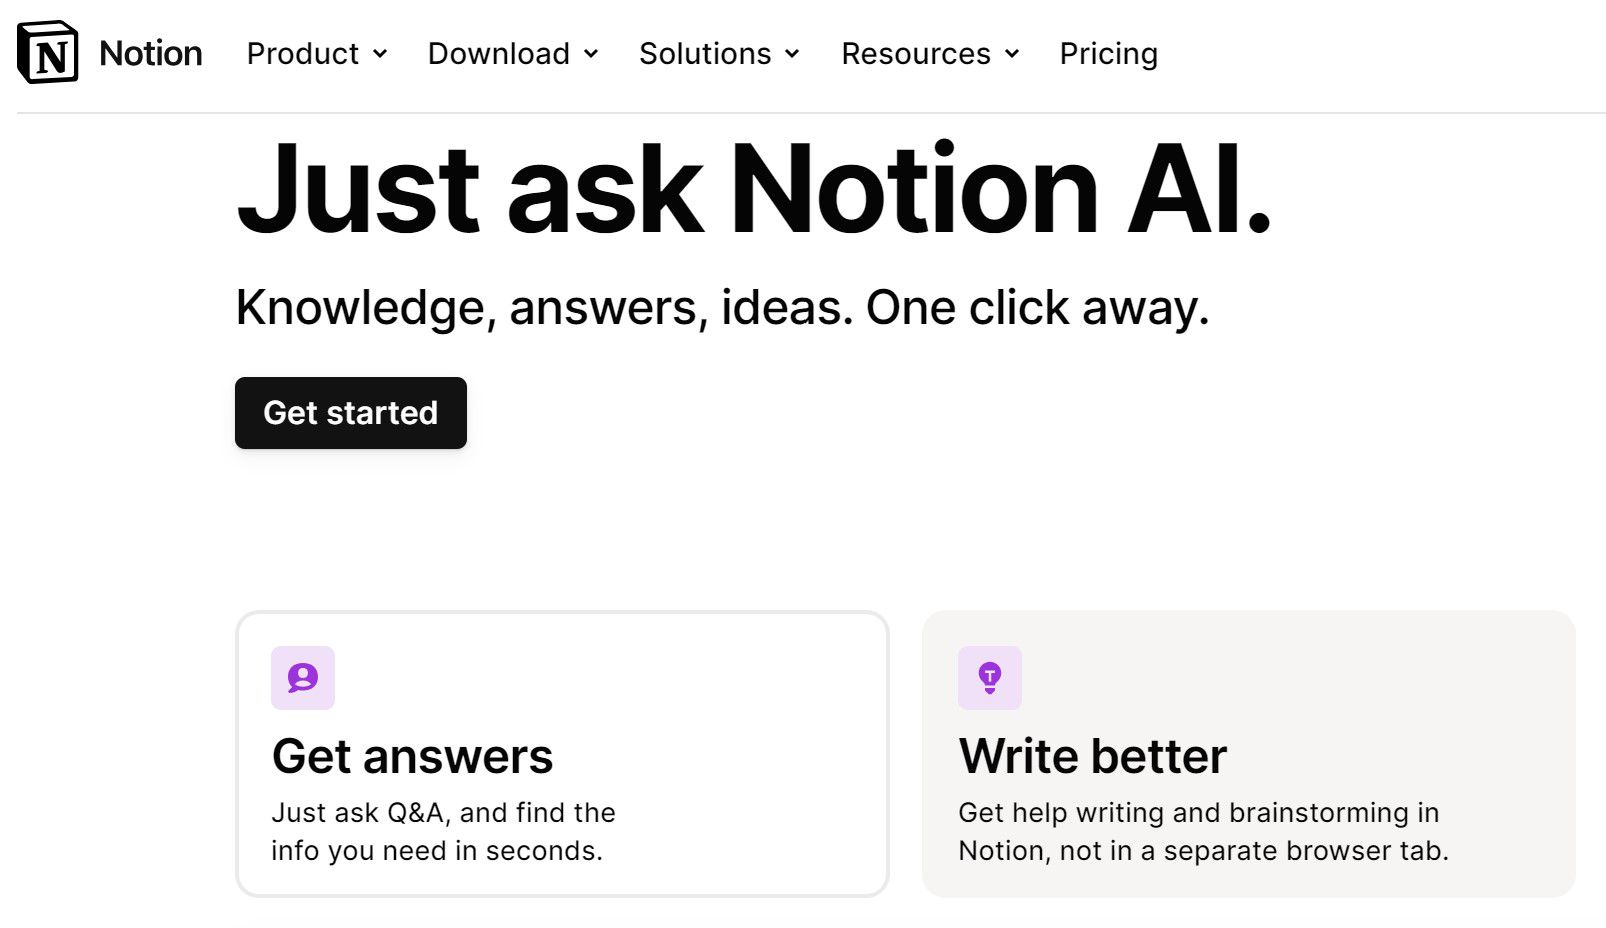 <p>Notion offers AI functionalities for a range of use cases. Its AI-powered writing feature can help you create tailored business plans. It can summarize market research and other crucial docs, fix spelling and grammar mistakes in your writing, and generate outlines and templates for creating comprehensive business plans.</p><p>Plus, you can specify the voice and tone Notion AI should use when generating content. Since Notion is trained on vast amounts of data, it provides tips and insights to enhance your strategies. Moreover, Notion supports real-time collaboration, allowing different team members to work together to develop detailed business plans.</p><p>Pros:</p><ul><li>Numerous comprehensive features in one package can be better value for your money</li><li>Free plan</li><li>Supports a collaborative workspace</li><li>Assists in finding ideas for a new startup and generating business plan content</li></ul><p>Cons:</p><ul><li>Not tailored specifically for business plan creation, meaning it requires more detailed and specific prompts to get the job done</li><li>Possibility of paying for features you don’t need</li><li>Pay more to store files for more than 90 days</li><li>Outputs can sometimes be biased or inaccurate</li></ul><p>Pricing:</p><ul><li>Free with limited tier</li><li>Plus plan for $10 per month</li><li>Business plan for $18 per month</li><li>Enterprise for a custom price quote</li></ul>